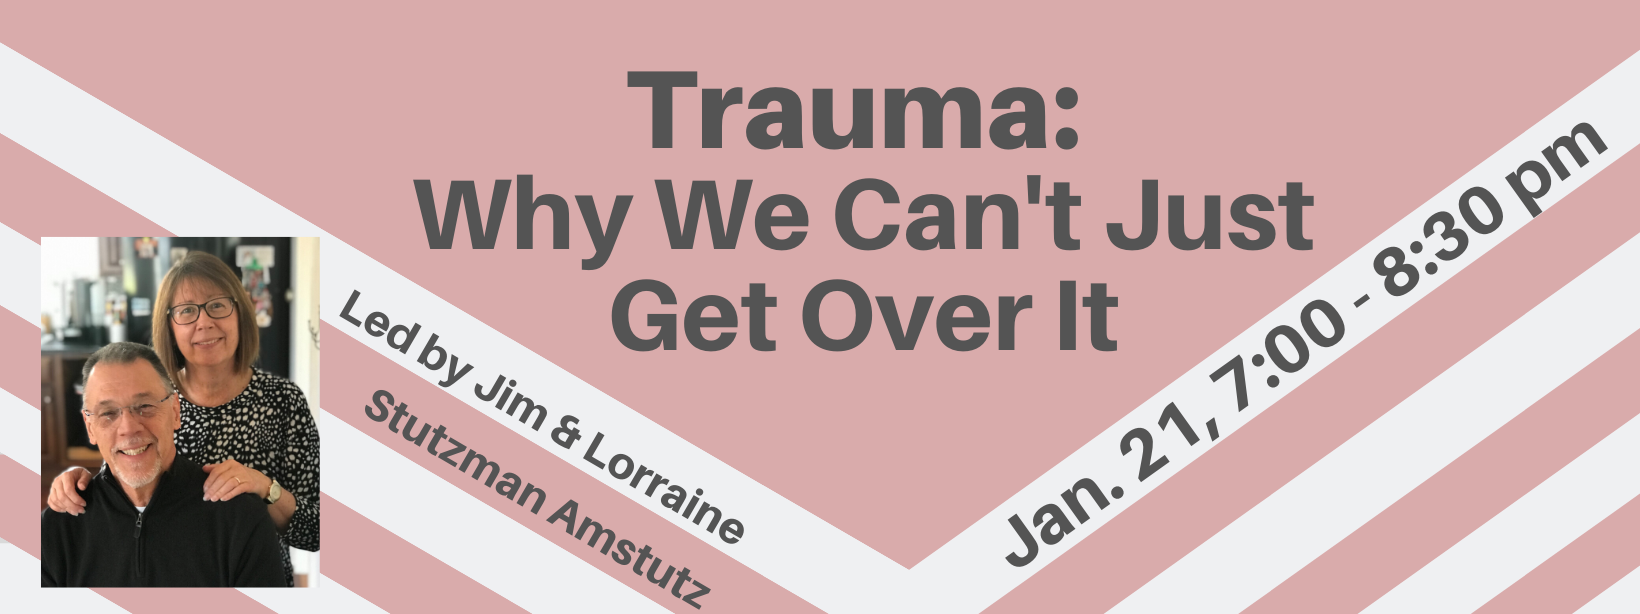 Trauma: Why We Can’t Just Get Over It